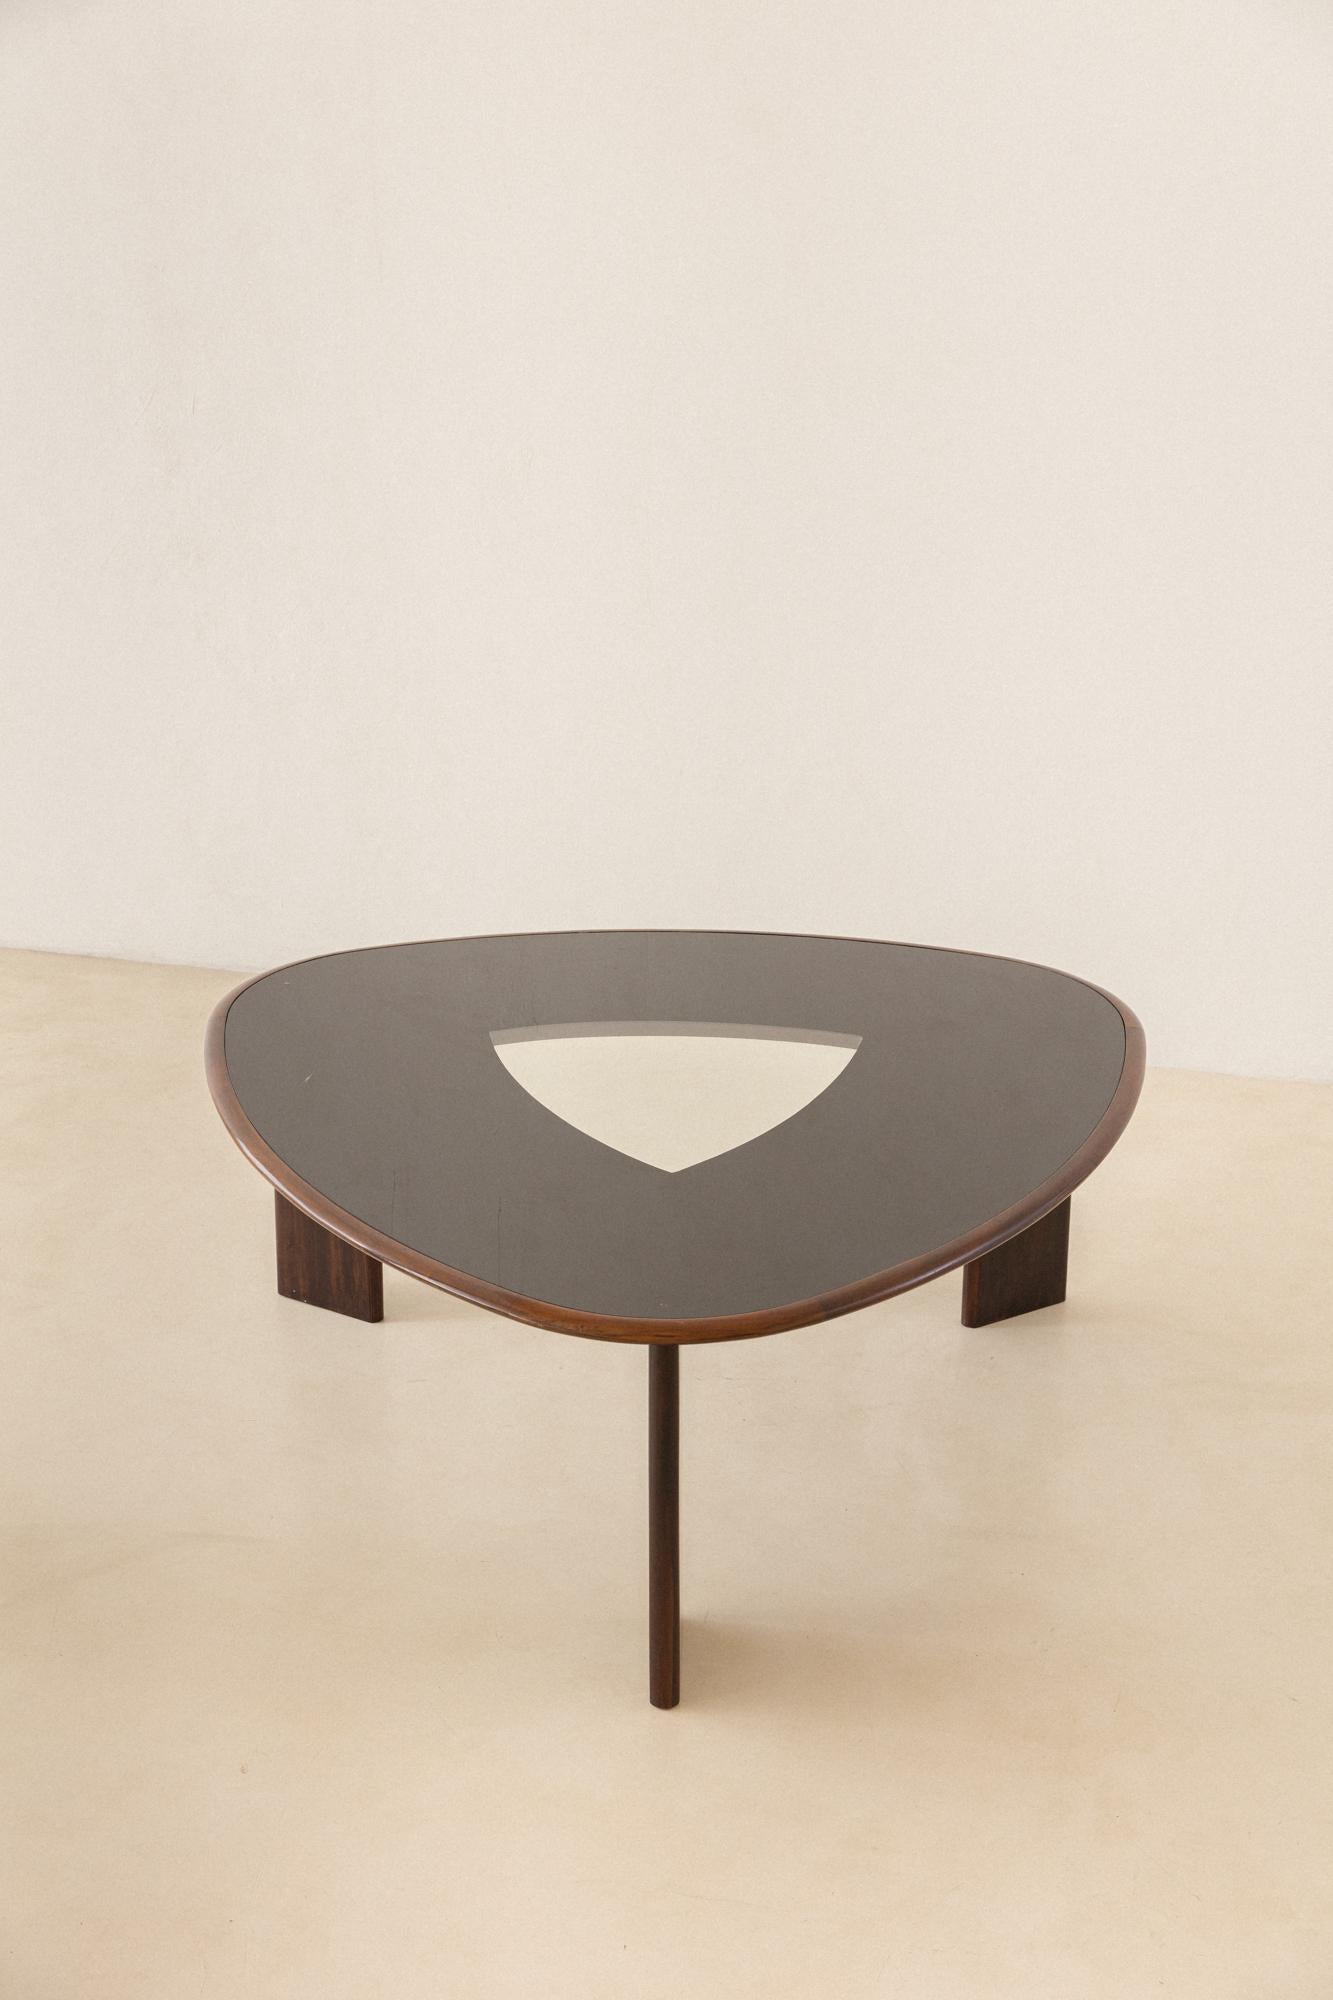  Triangular Table with Painted Glass Top, Joaquim Tenreiro, circa 1960, Brazil In Good Condition For Sale In New York, NY